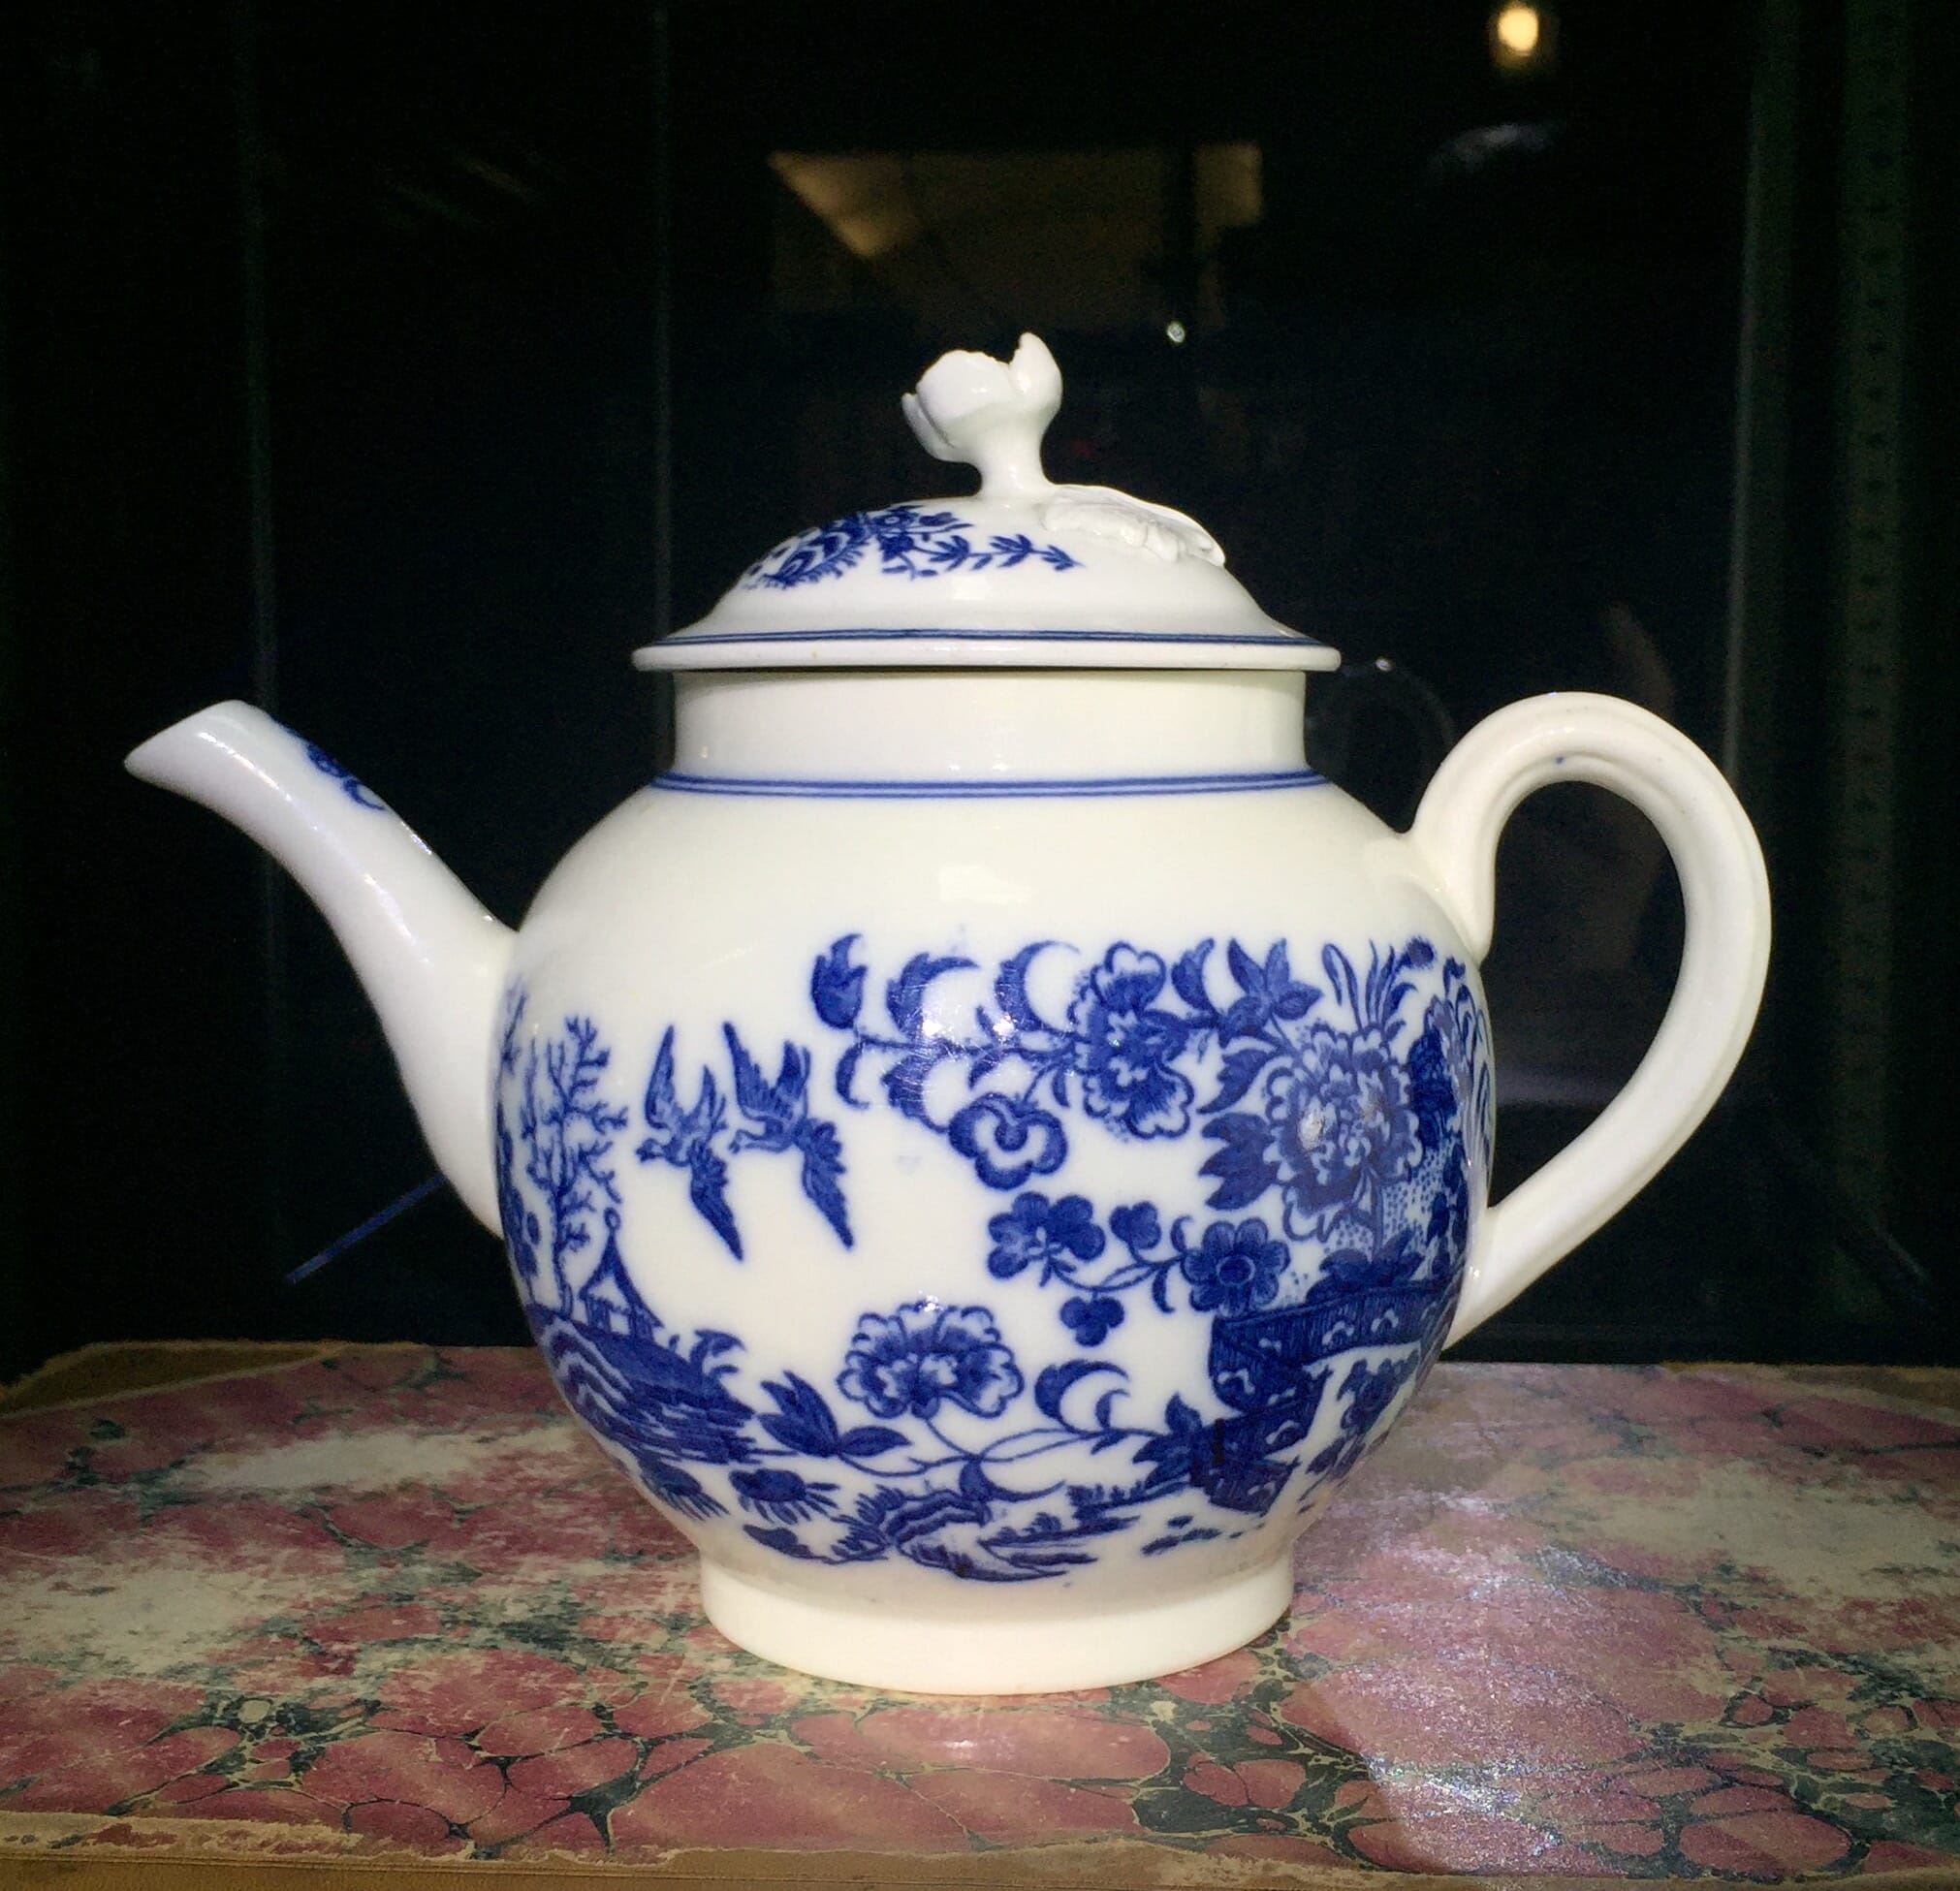 Caughley teapot, printed in blue with the 'Fence' pattern, c. 1785-0